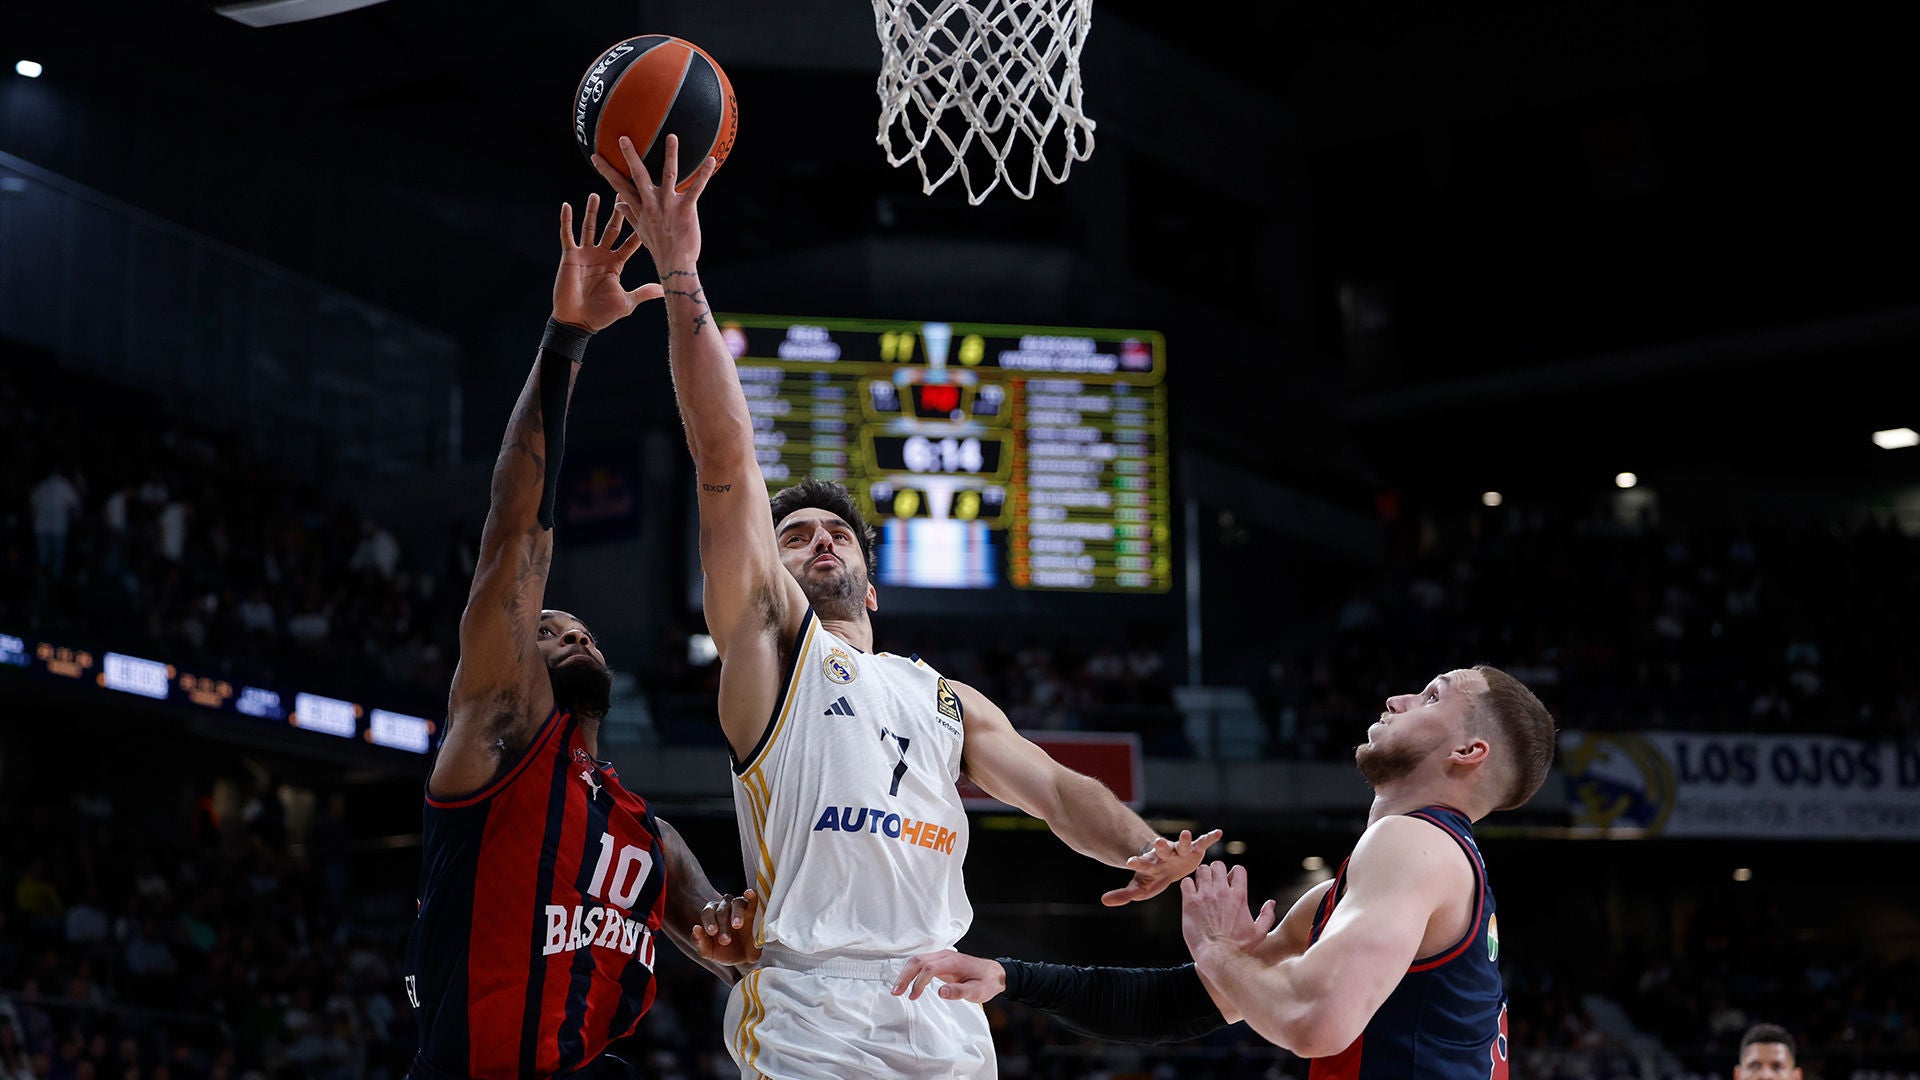 Real Madrid head into the second Euroleague playoff game tomorrow